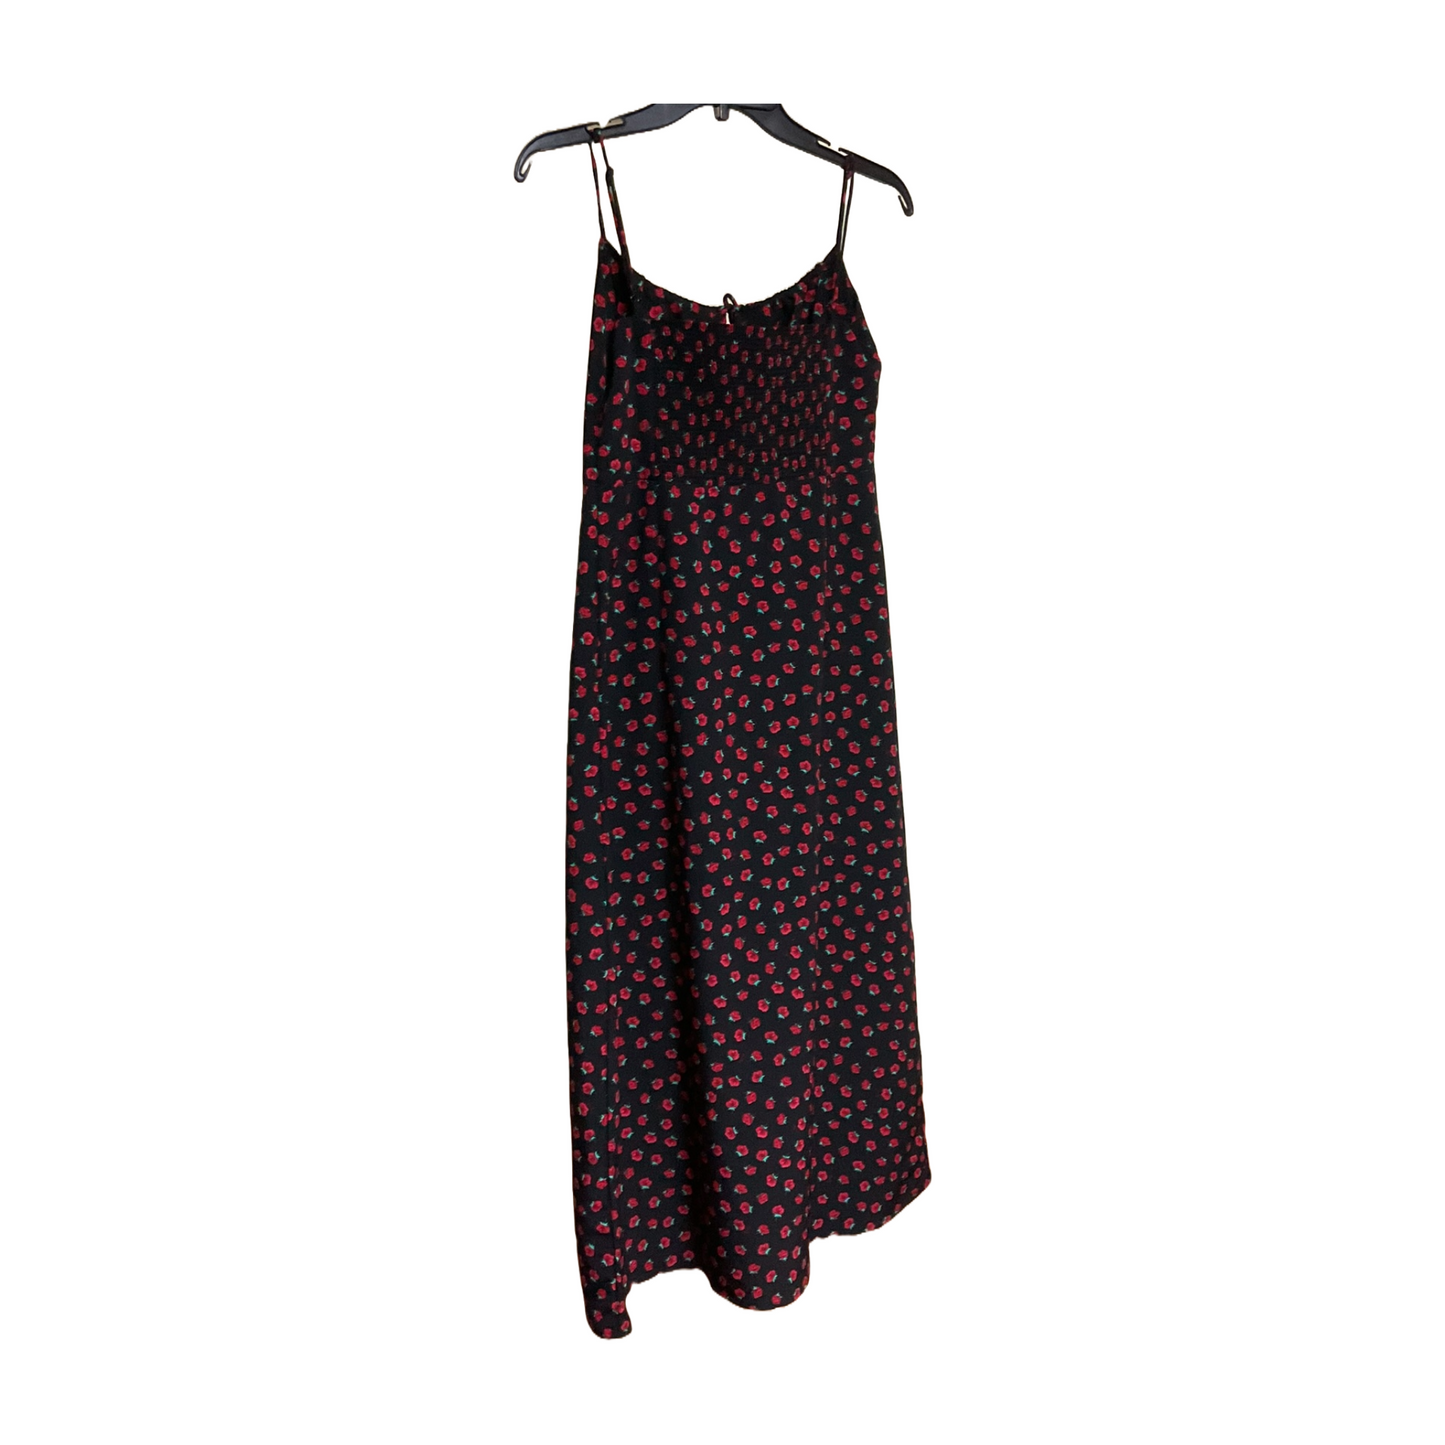 Dress Black with Red Roses (Small)